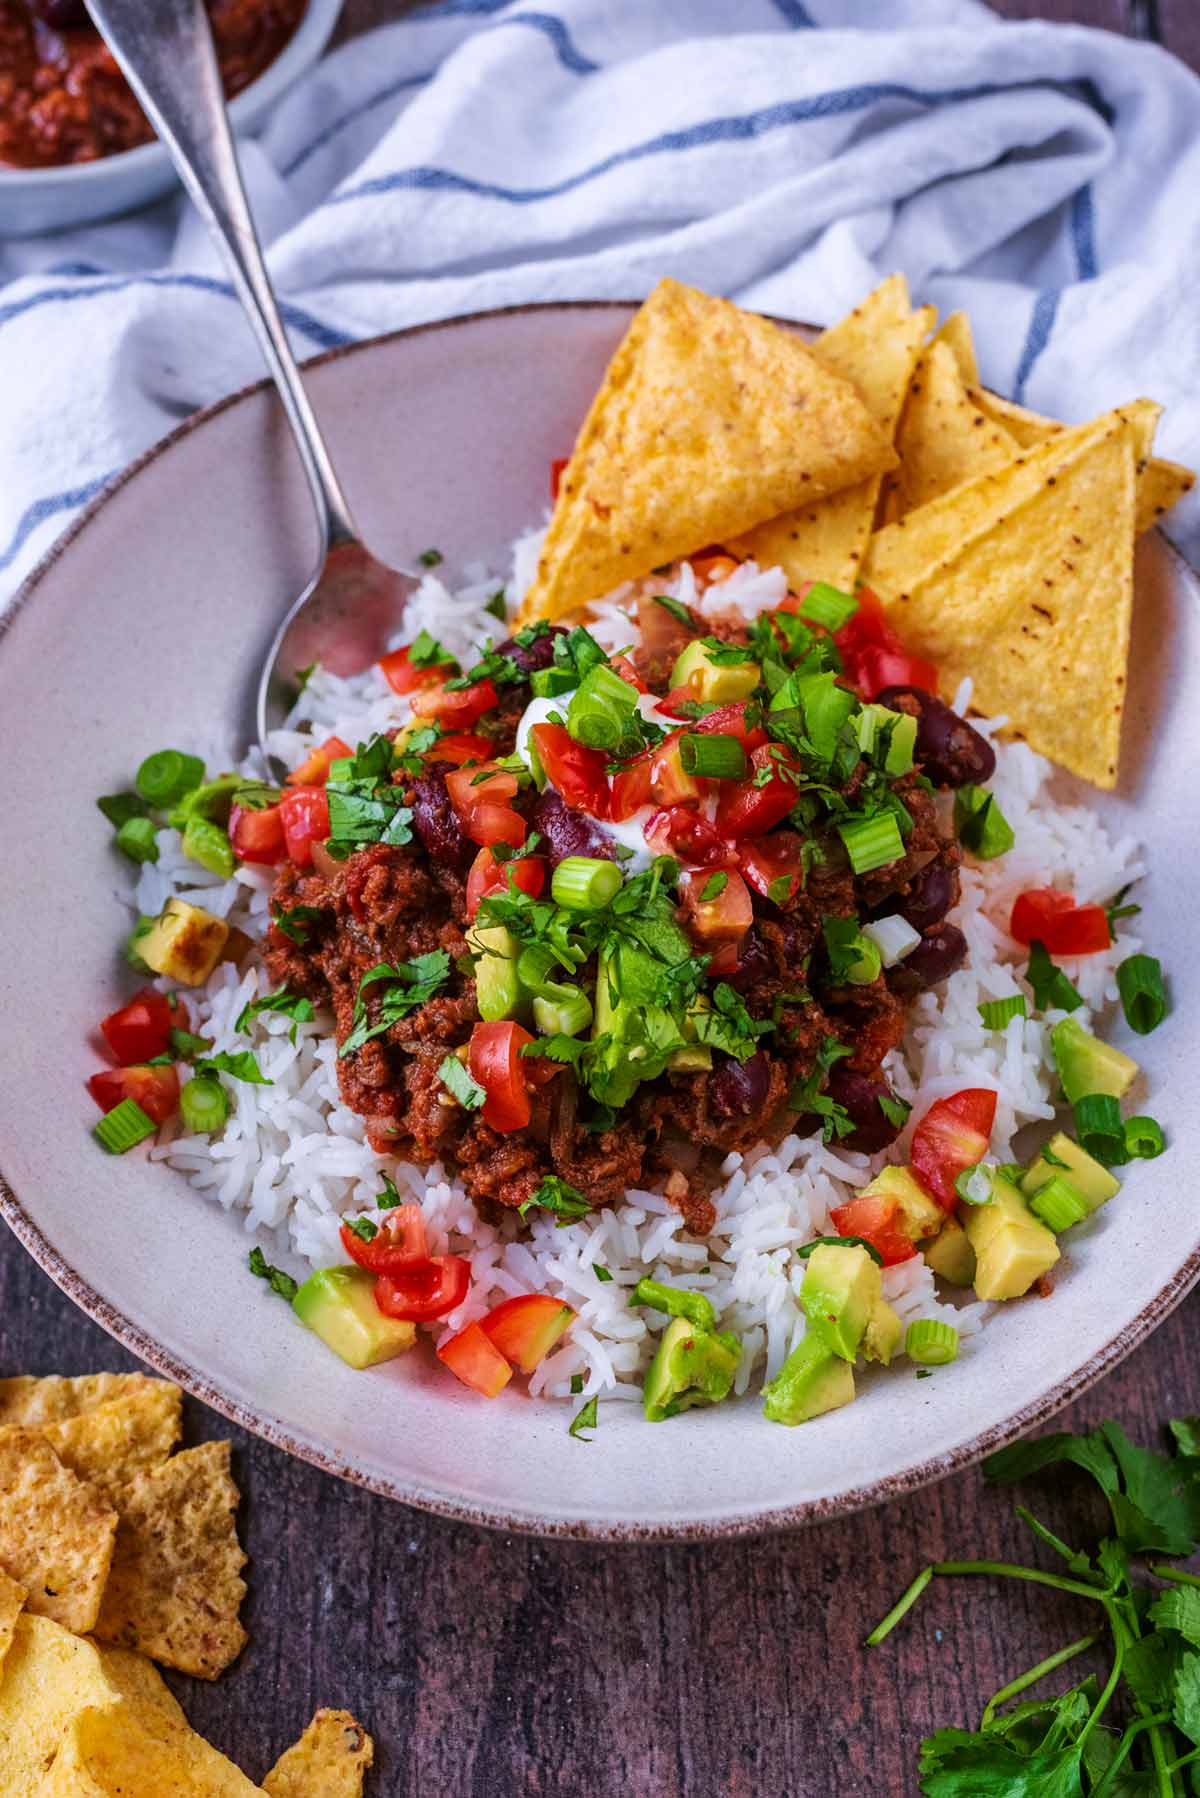 A bowl of chilli and rice with some tortilla chips in front of a striped towel.